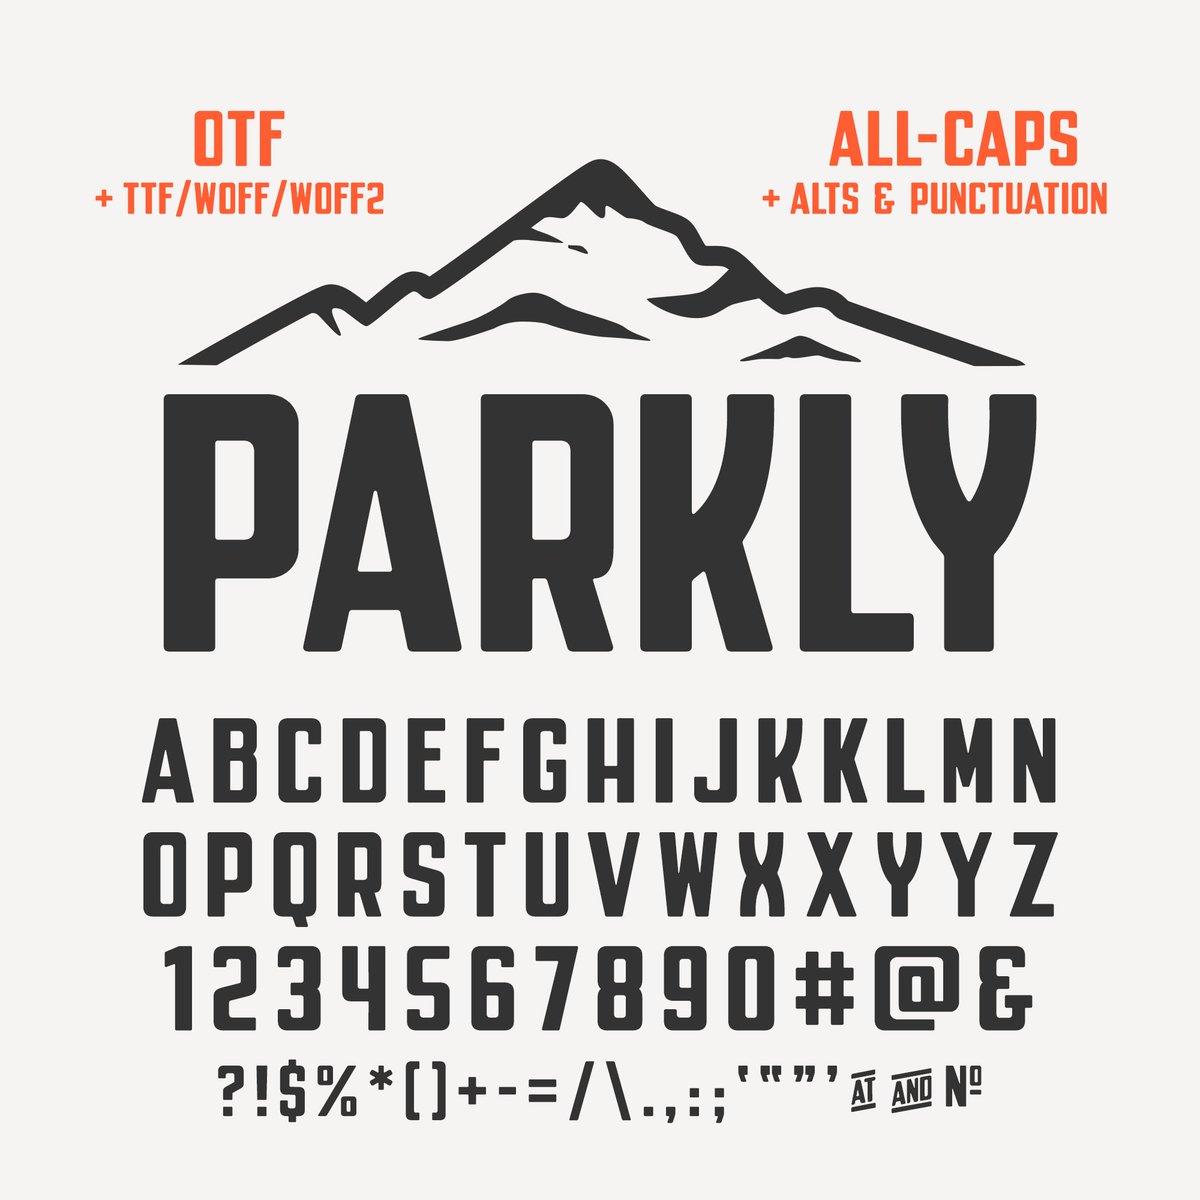 Dan Cederholm On Twitter Introducing Parkly My New Font Inspired By Vintage National Park Posters It S An All Caps Display Typeface That Includes Numbers Basic Punctuation And A Few Alternate Characters You Can Buy